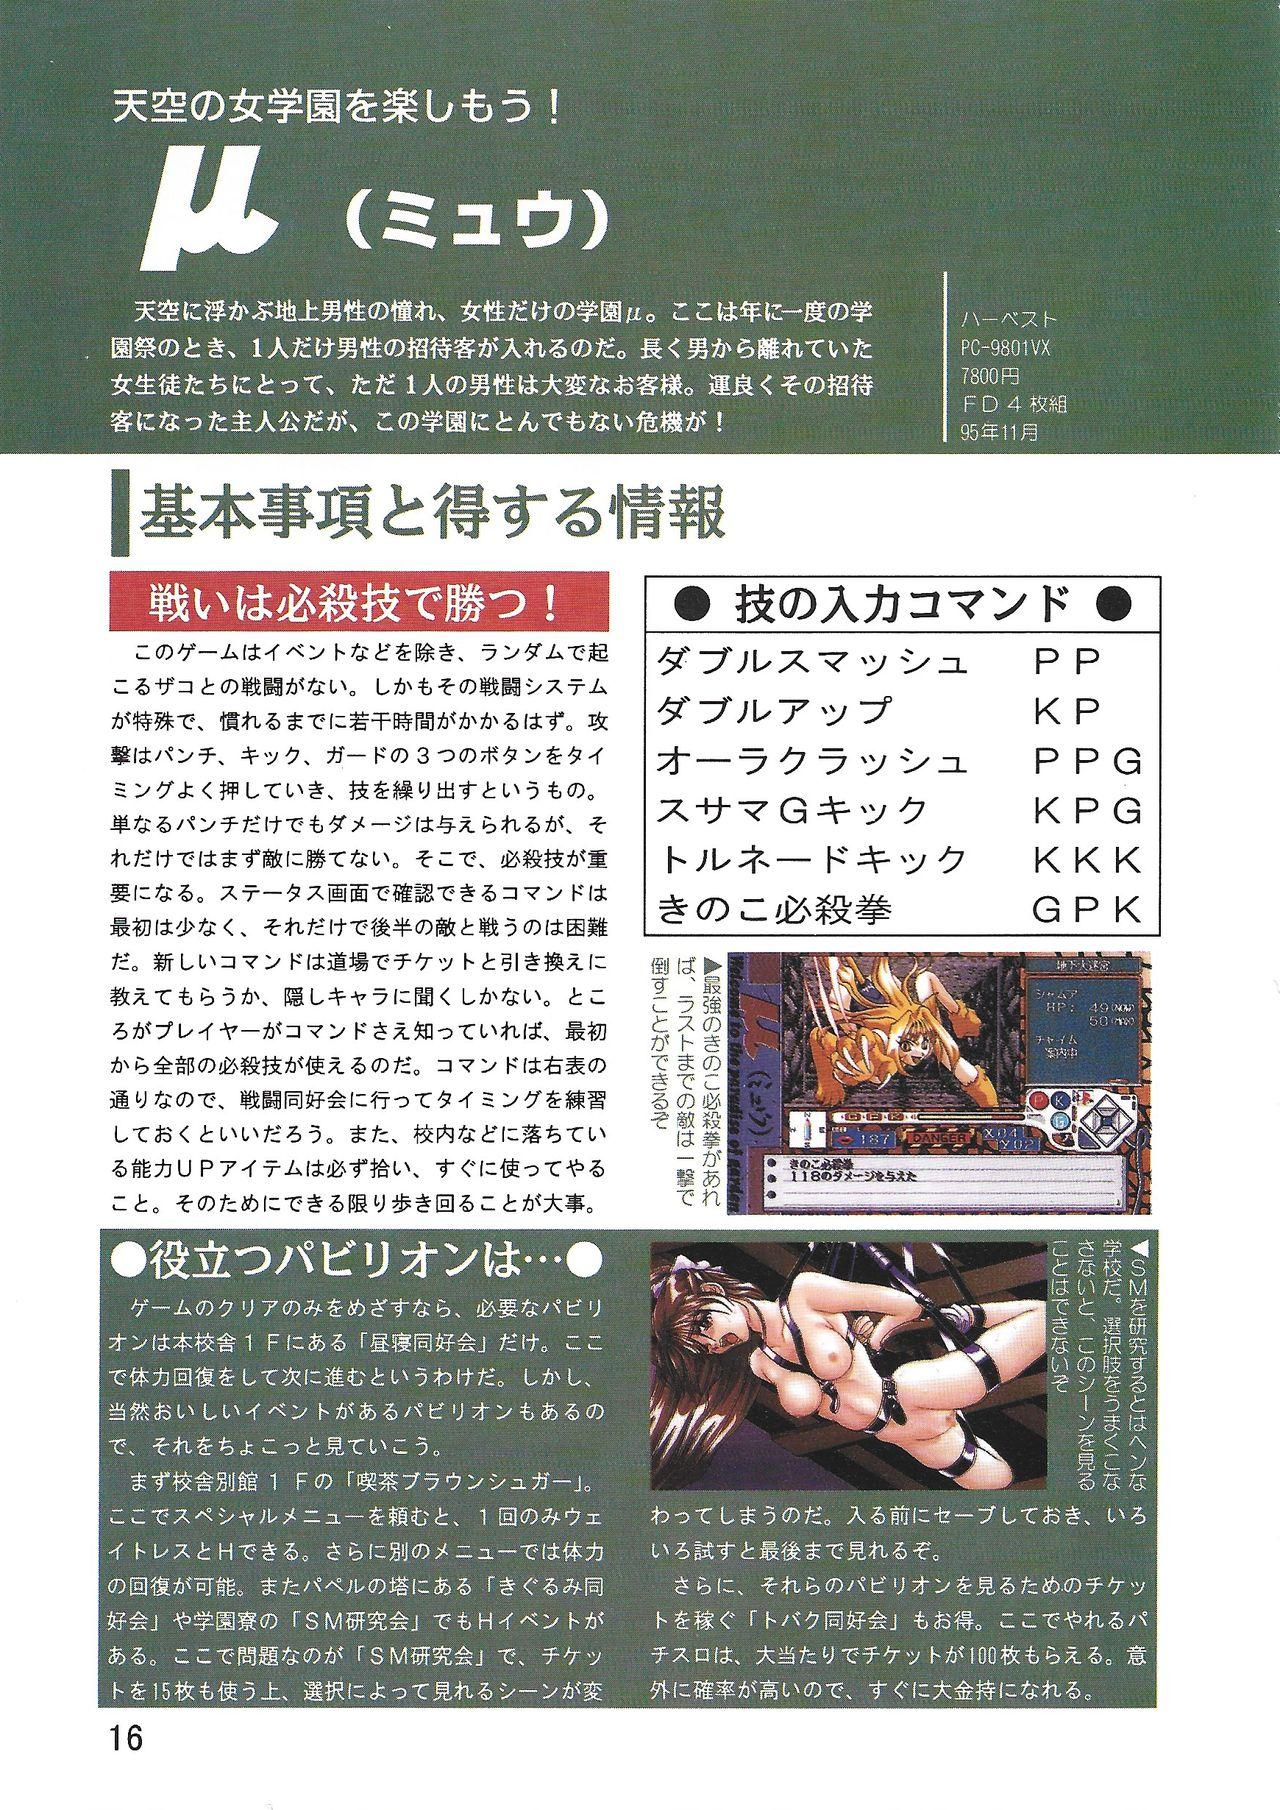 PC Bishoujo Software Strategy Book: Strategy King 2 15